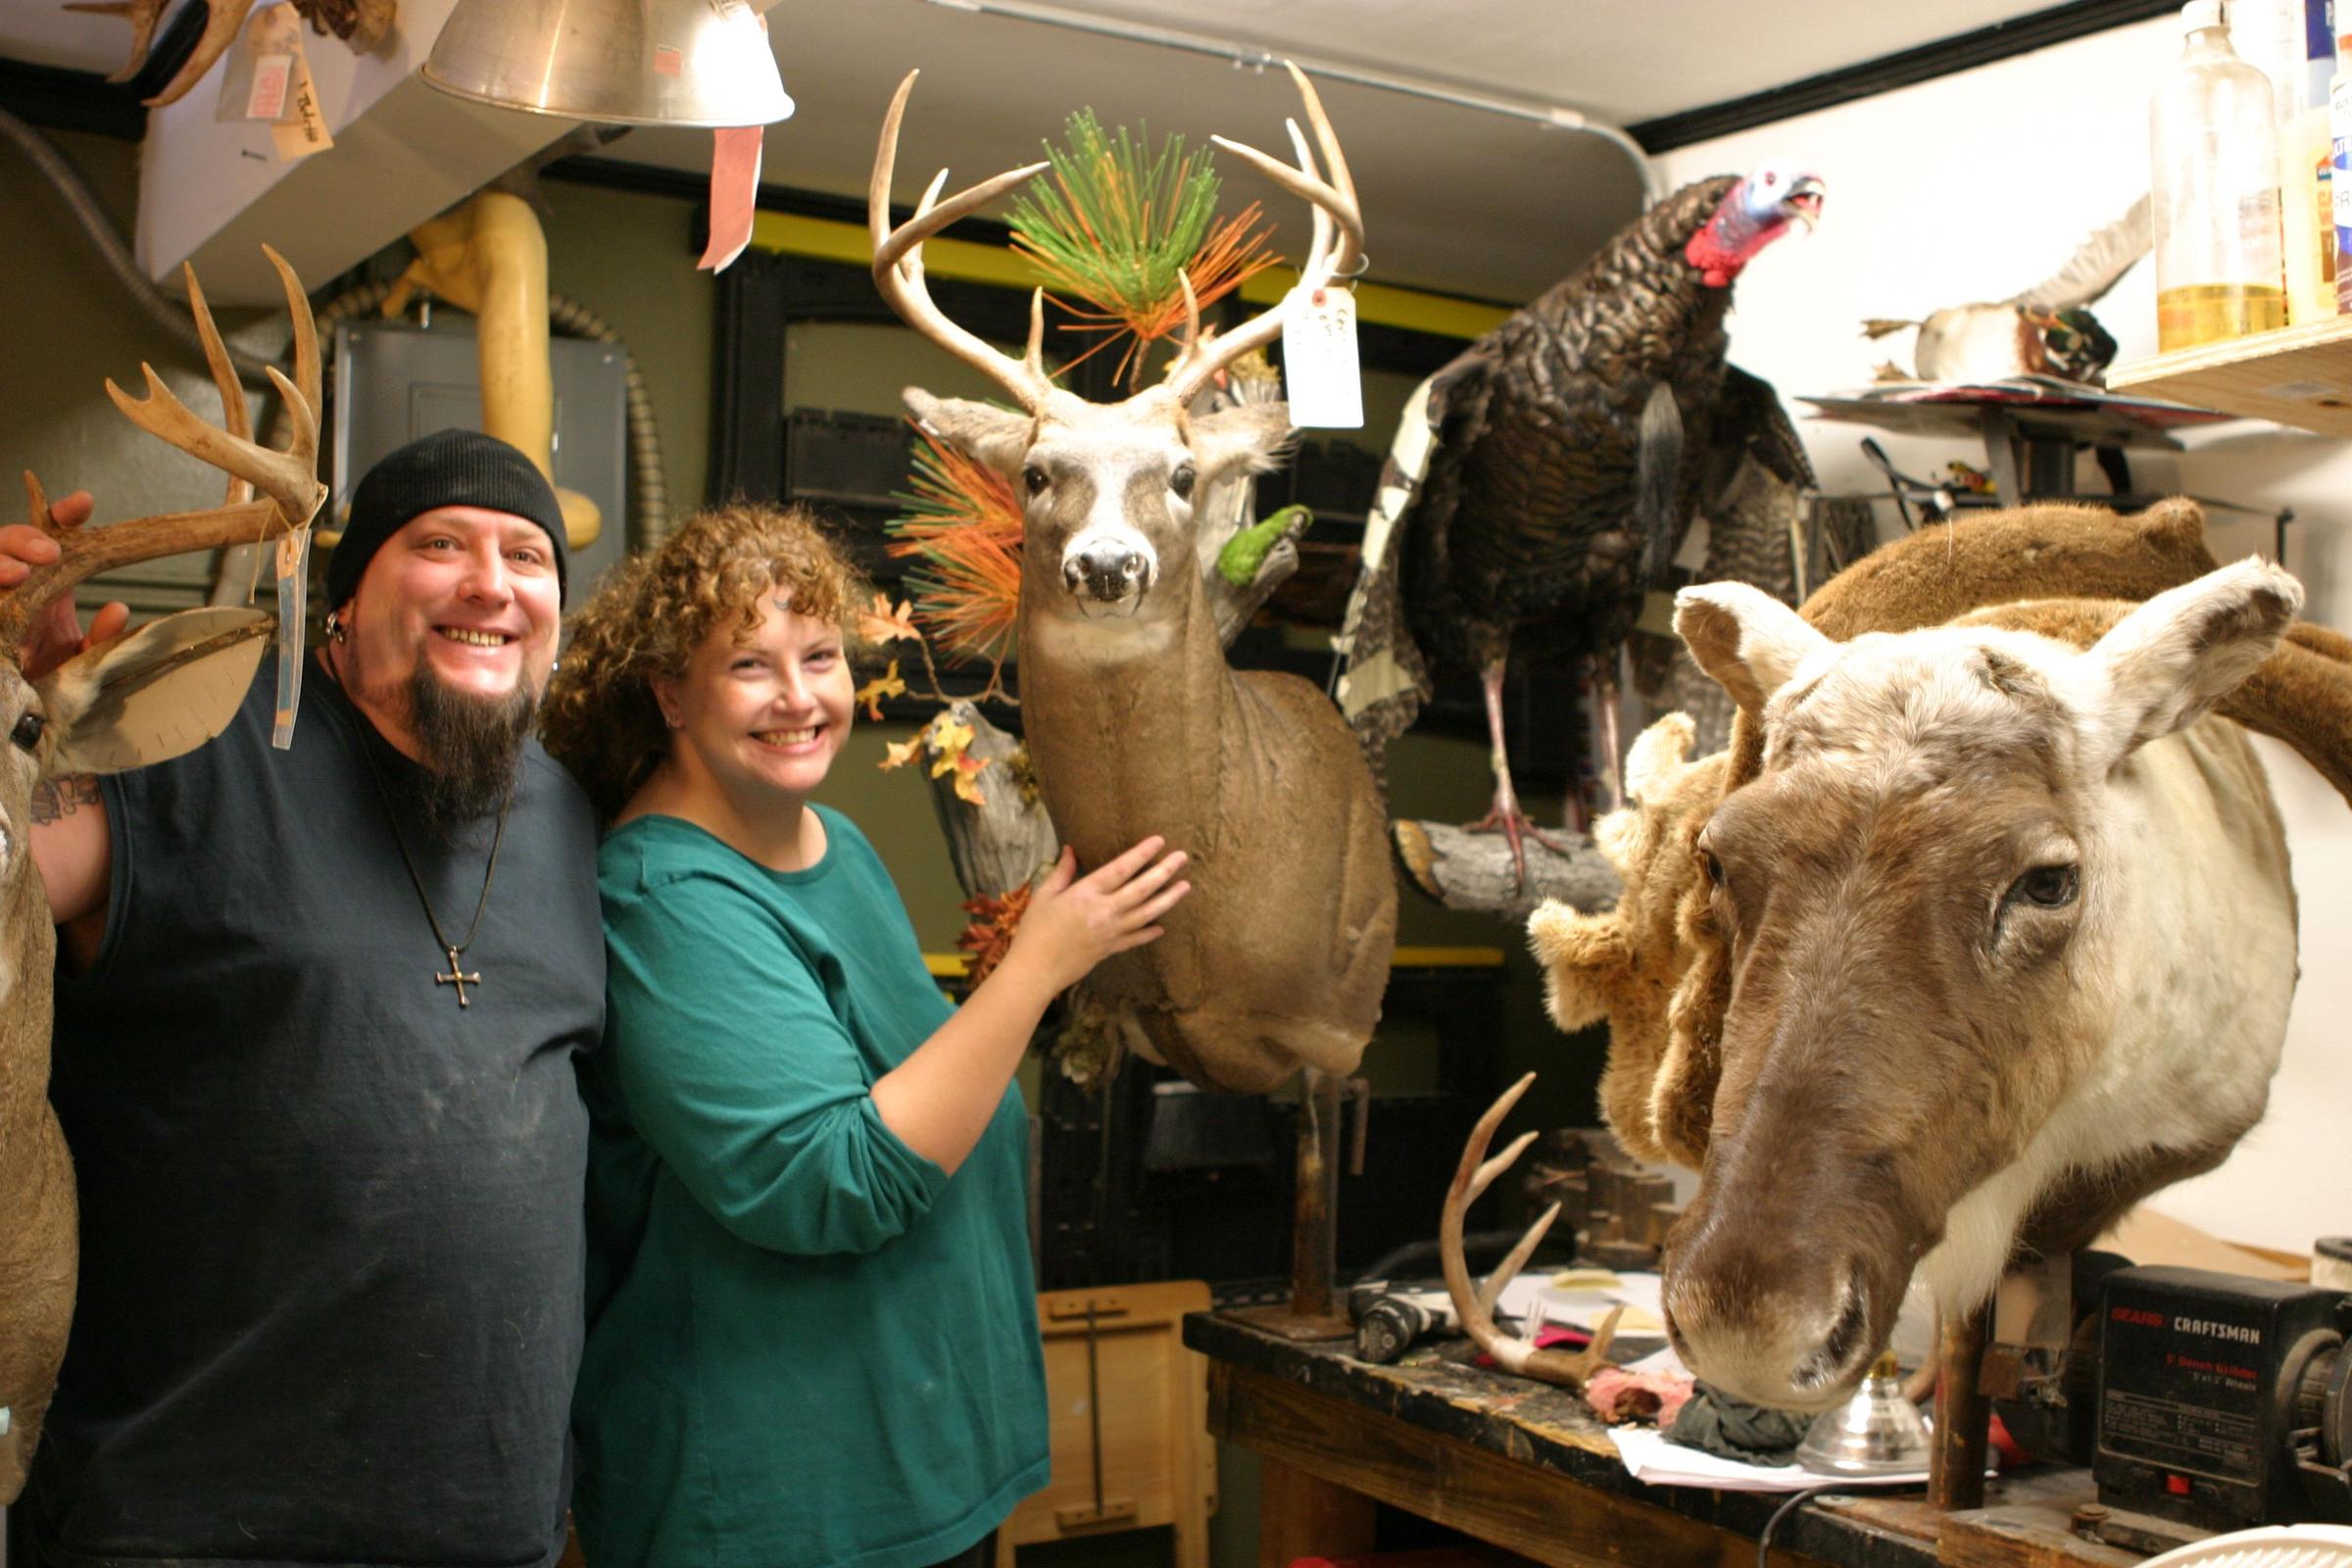 Record Hunting Season Means Good Business For Taxidermists | New ...